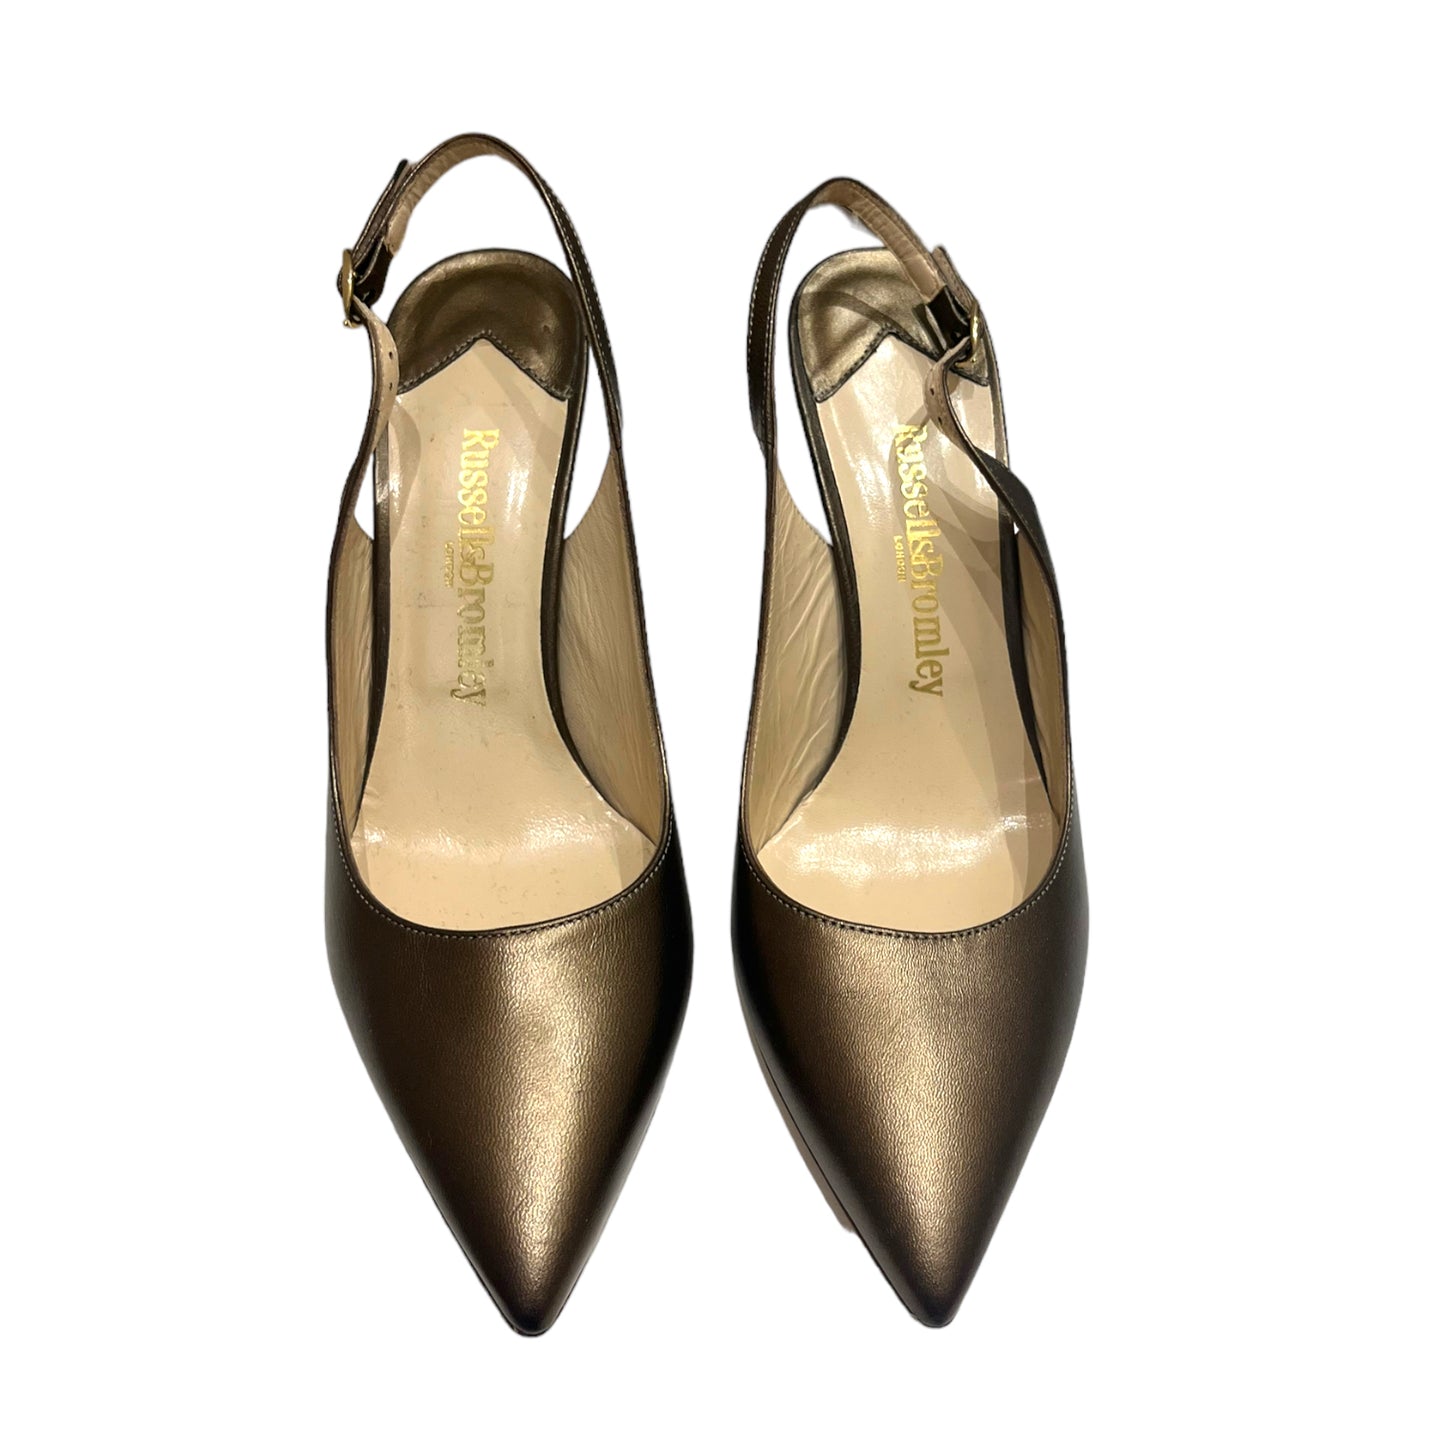 NEW Russell and Bromley Bronze Slingback Heels